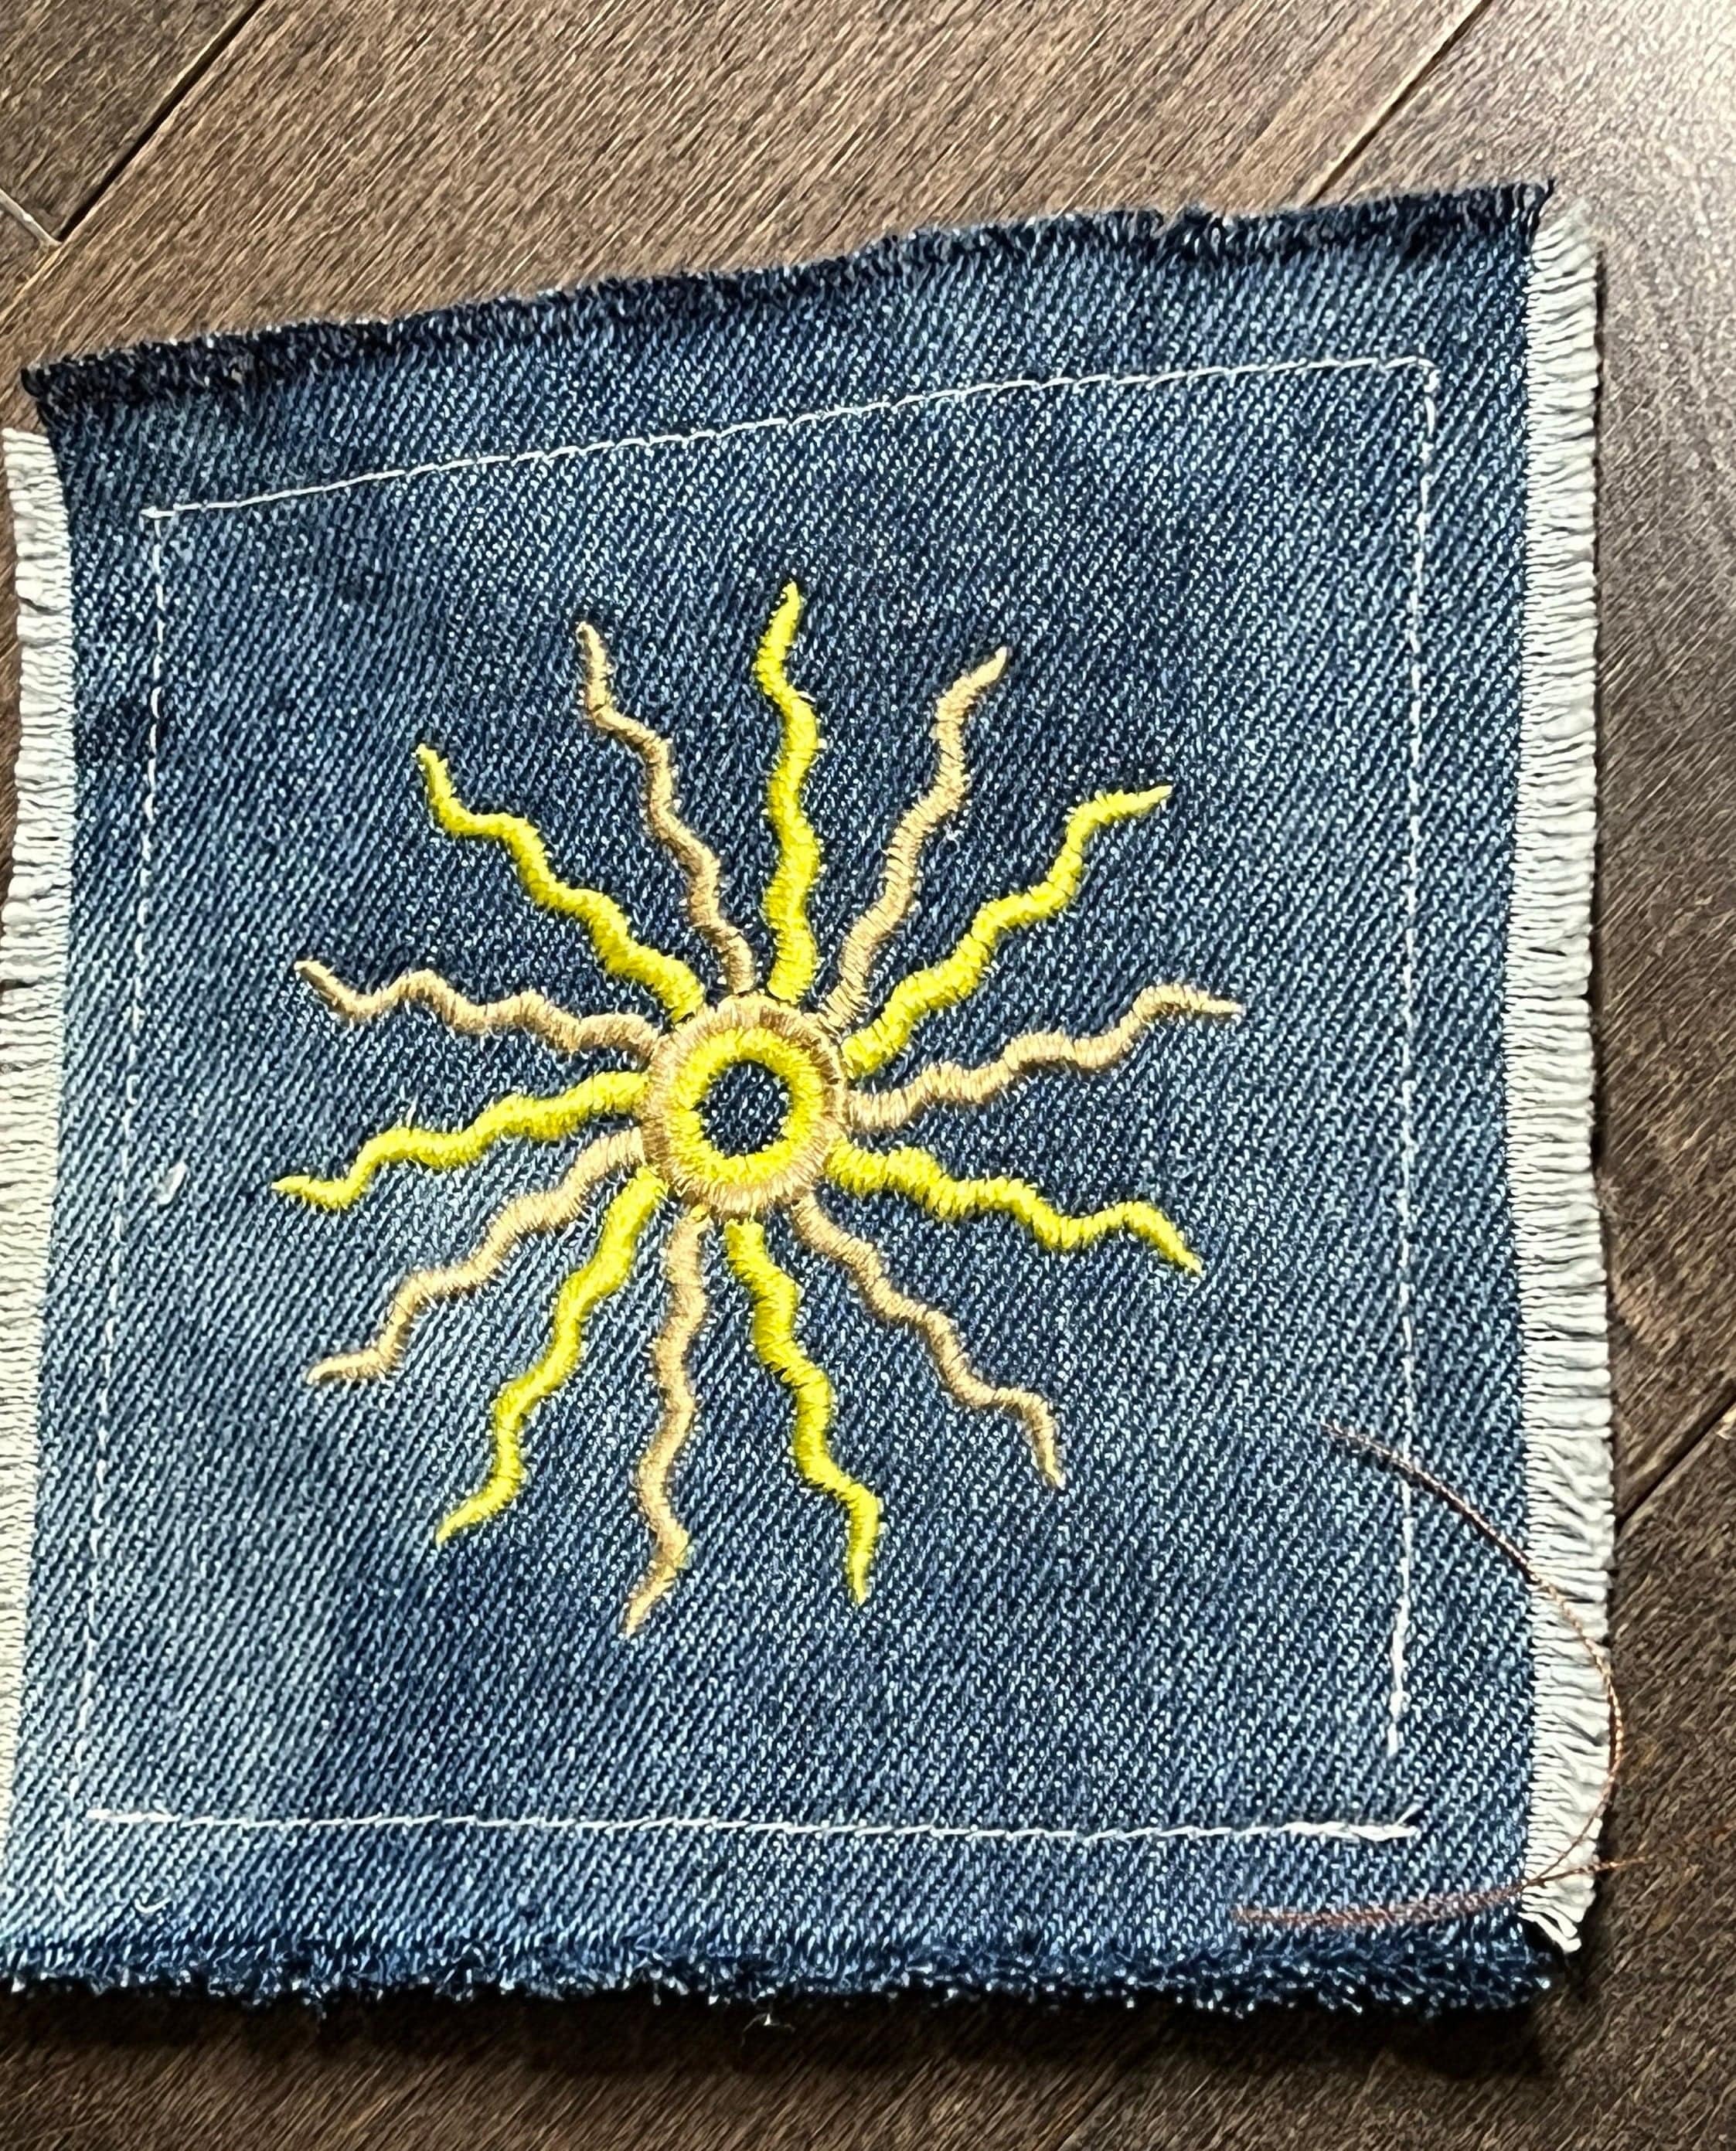 Dharma Sun SOULE PATCH - Buddhism Embroidered hand bleached Iron On Denim Pocket patch 4.75 X 4.75 Appliques & Patches